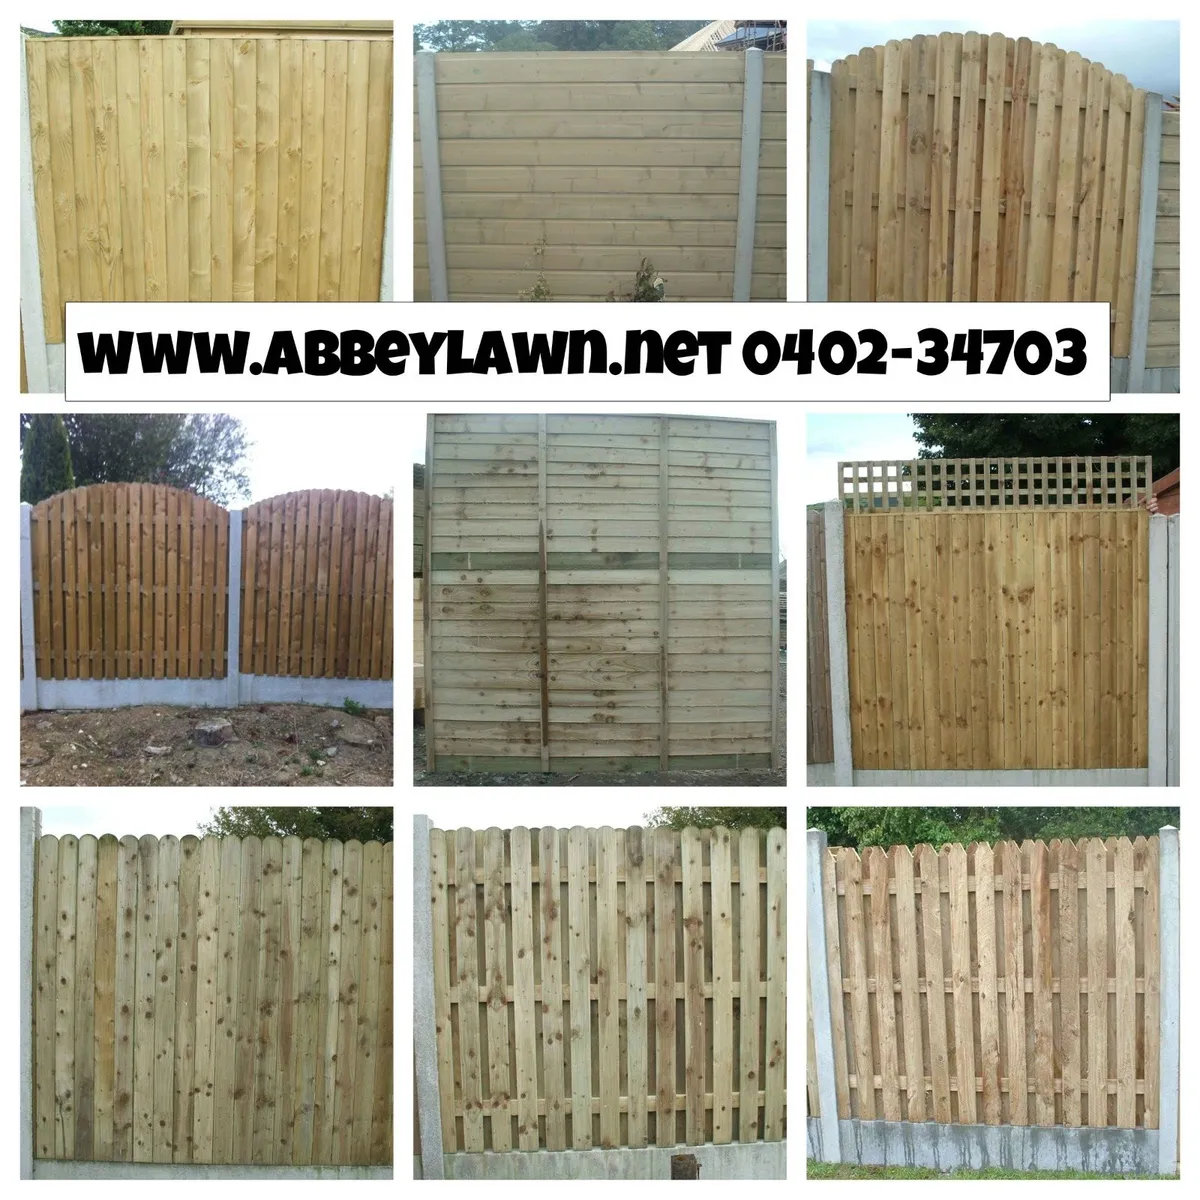 Timber Fencing Panels from €26 each - Image 1